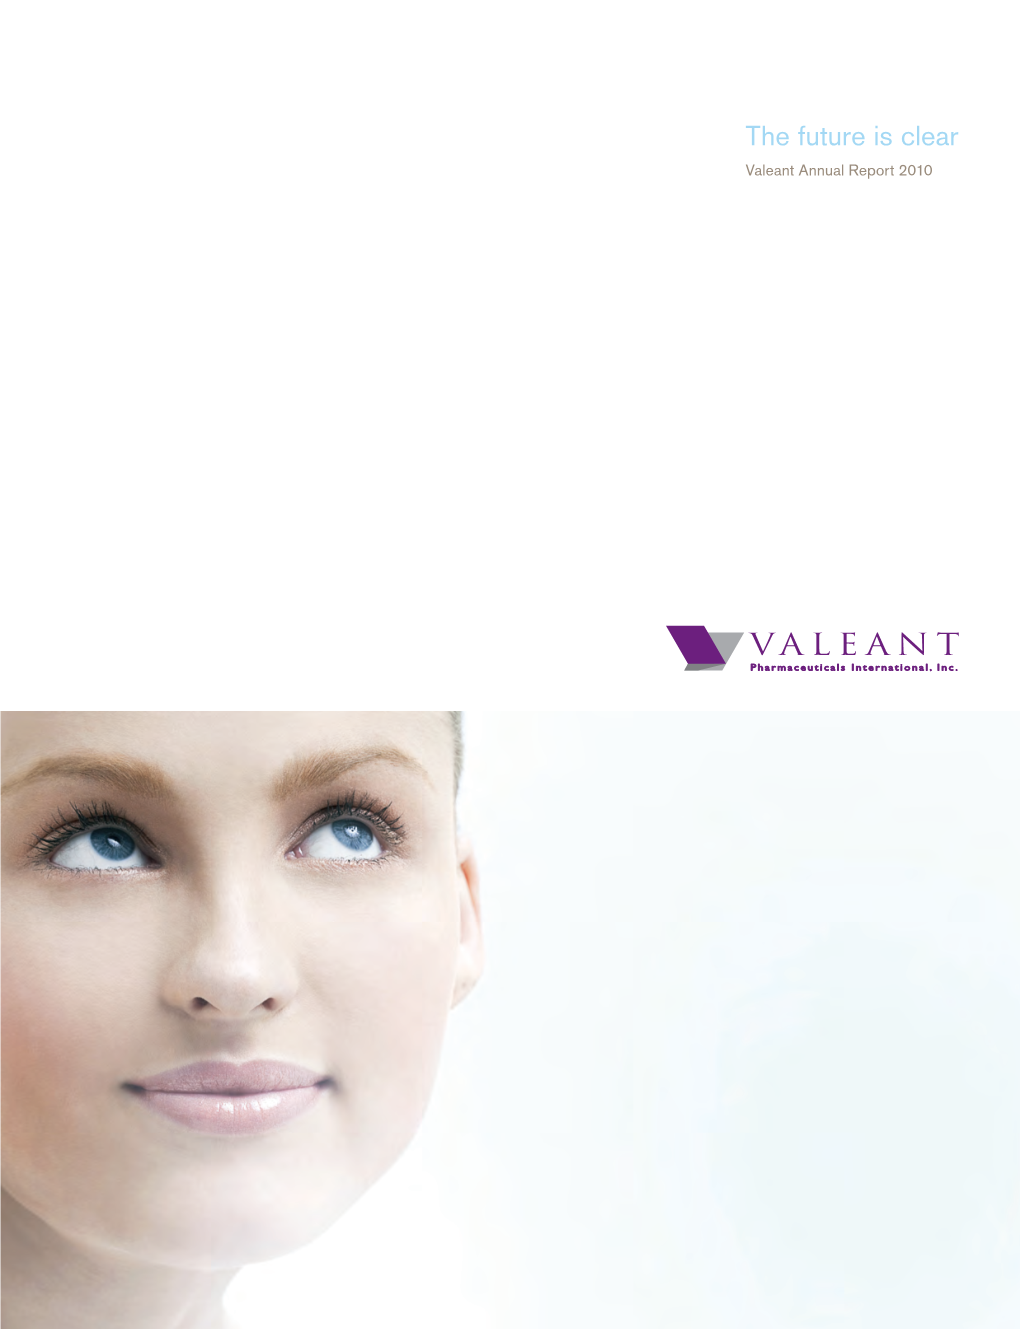 The Future Is Clear Valeant Annual Report 2010 Company Overview Valeant Pharmaceuticals International, Inc